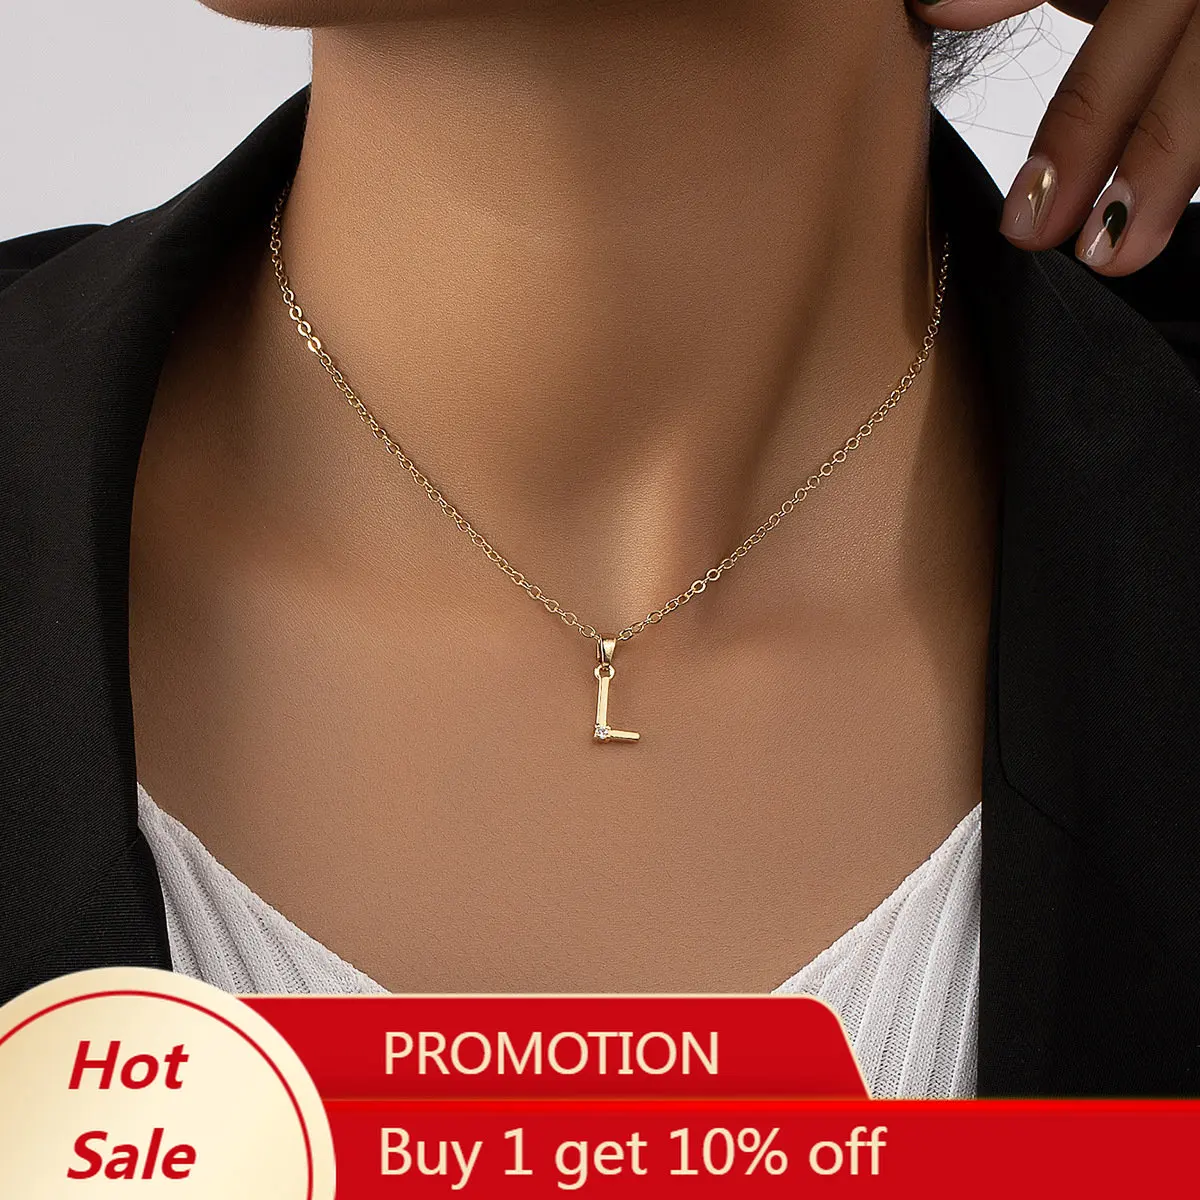 Minimalist Versatile Fashion Alloy Letter" L" "M" "S" "C" "J" Pendant Necklace Clavicle Chain for Women Girl Jewelry Party Gift